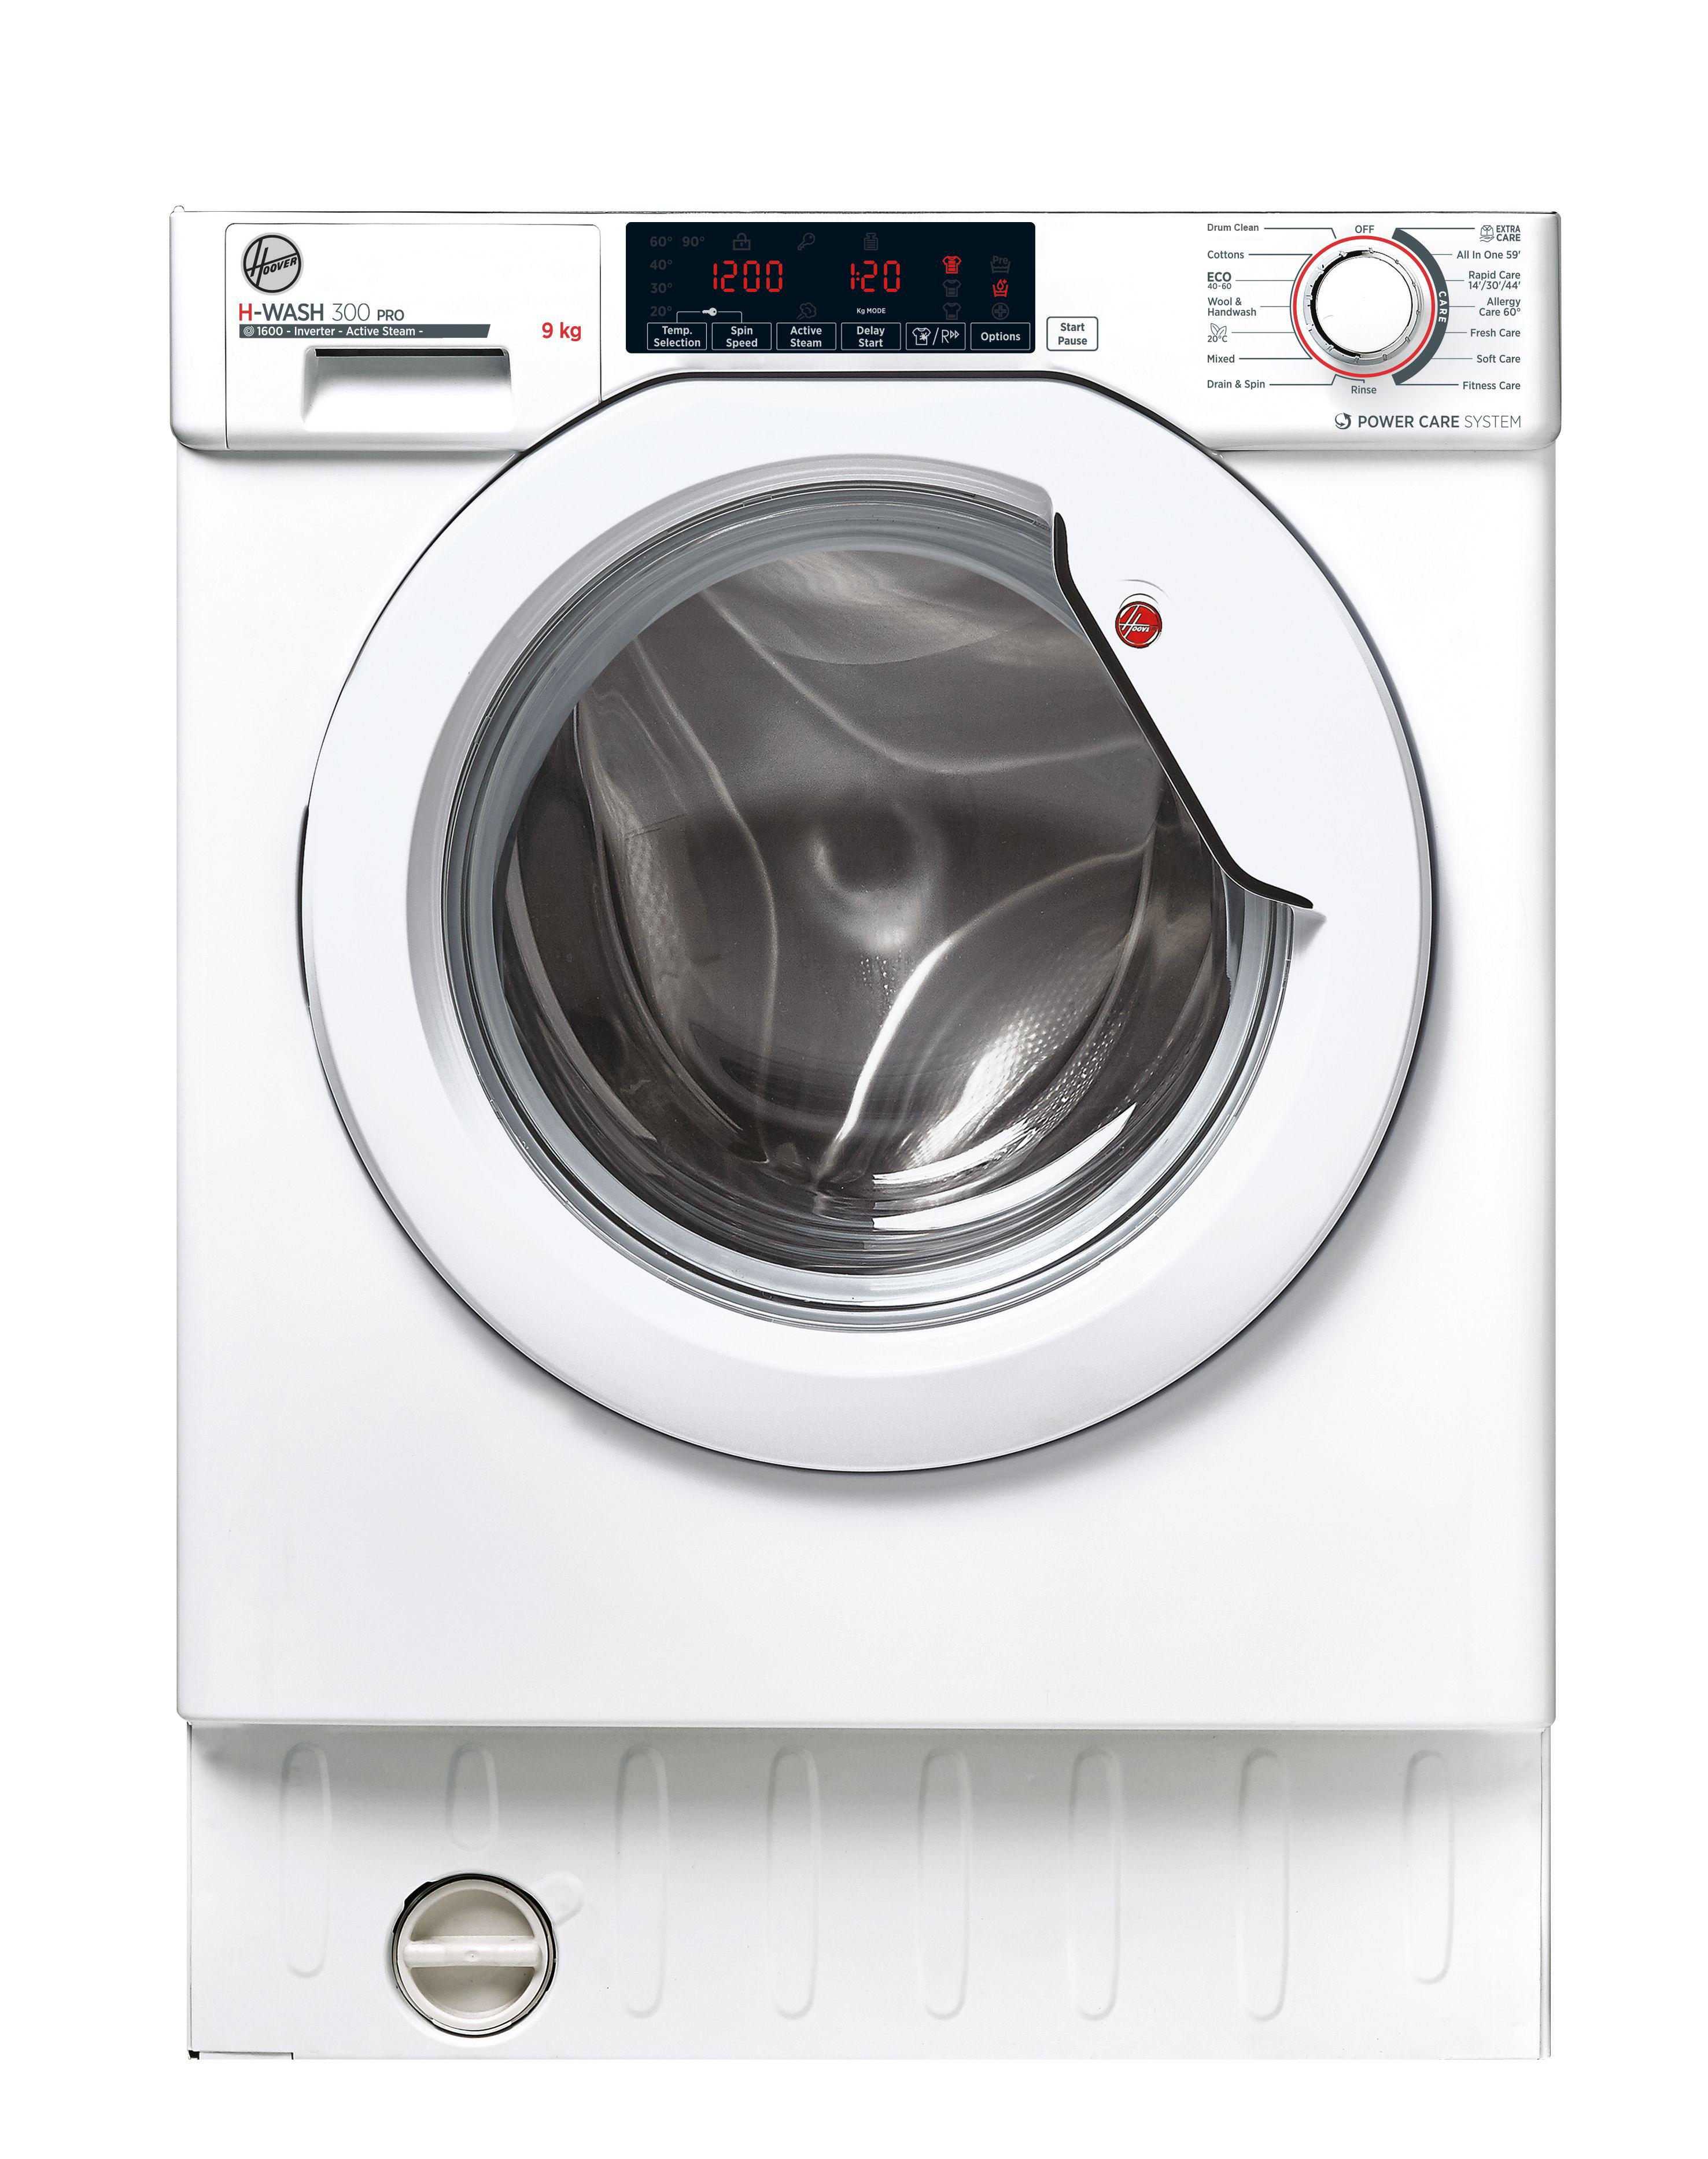 HOOVER H-Wash 300 Pro HBWOS69TAME-80 Integrated 9 kg 1600 Spin Washing Machine, White